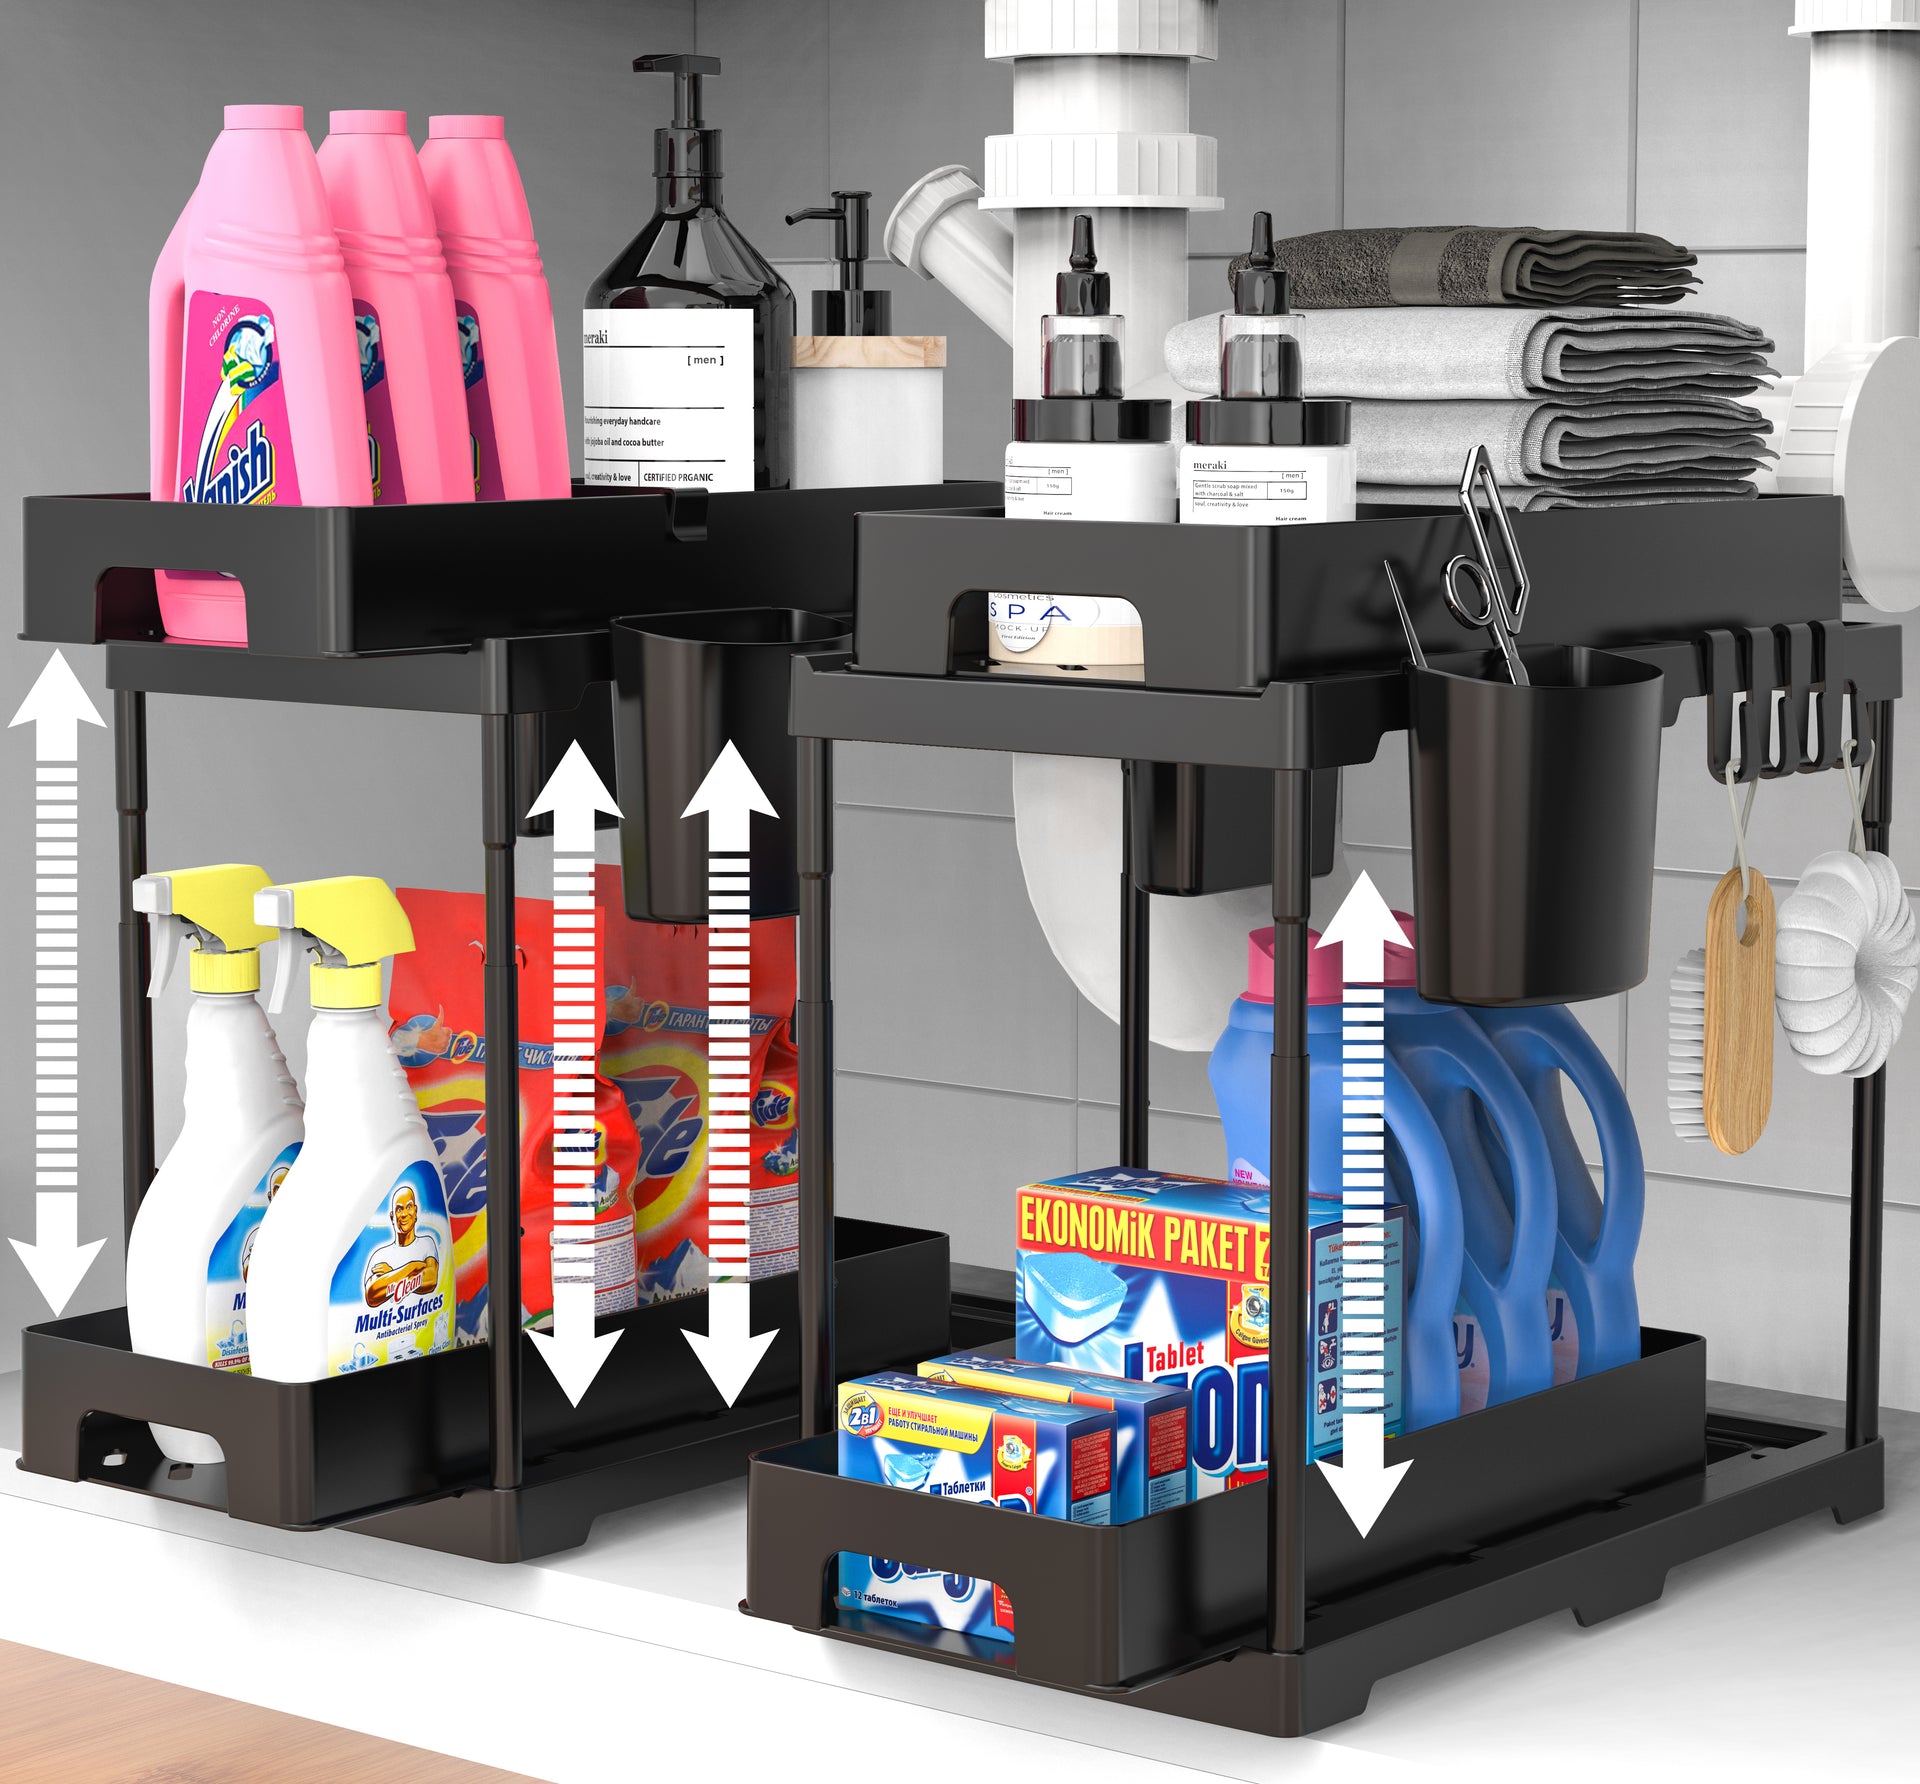 2-tier Sliding Cabinet Organizer With Hooks And Cup For Under Sink